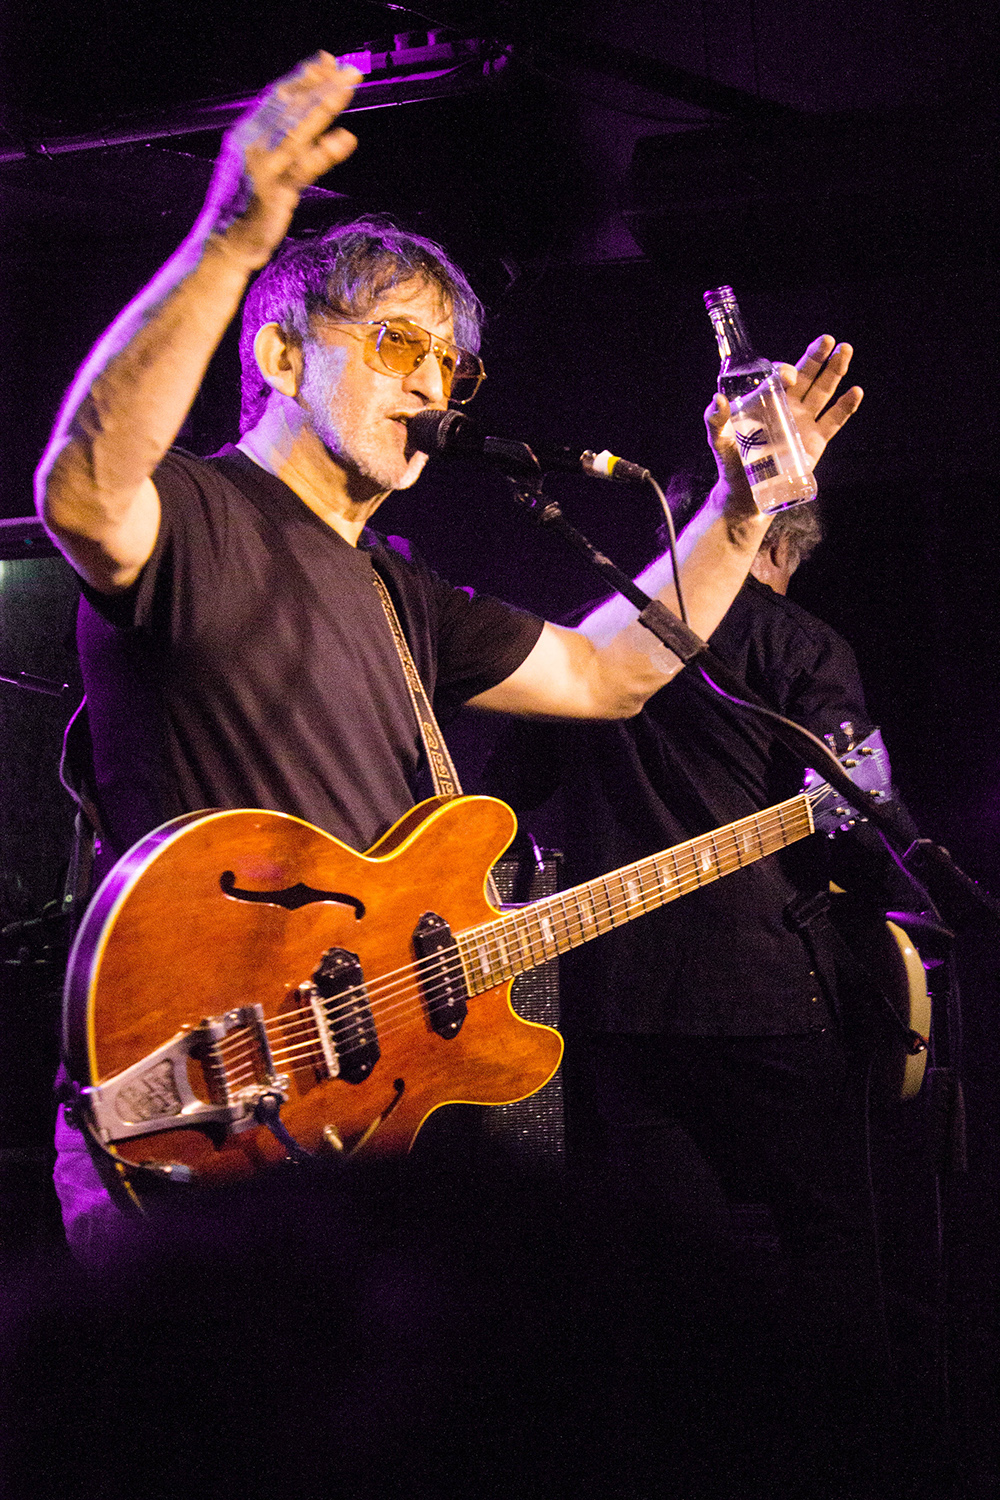 Ian Broudie from the Lightning seeds with his hands up on stage at the cavern